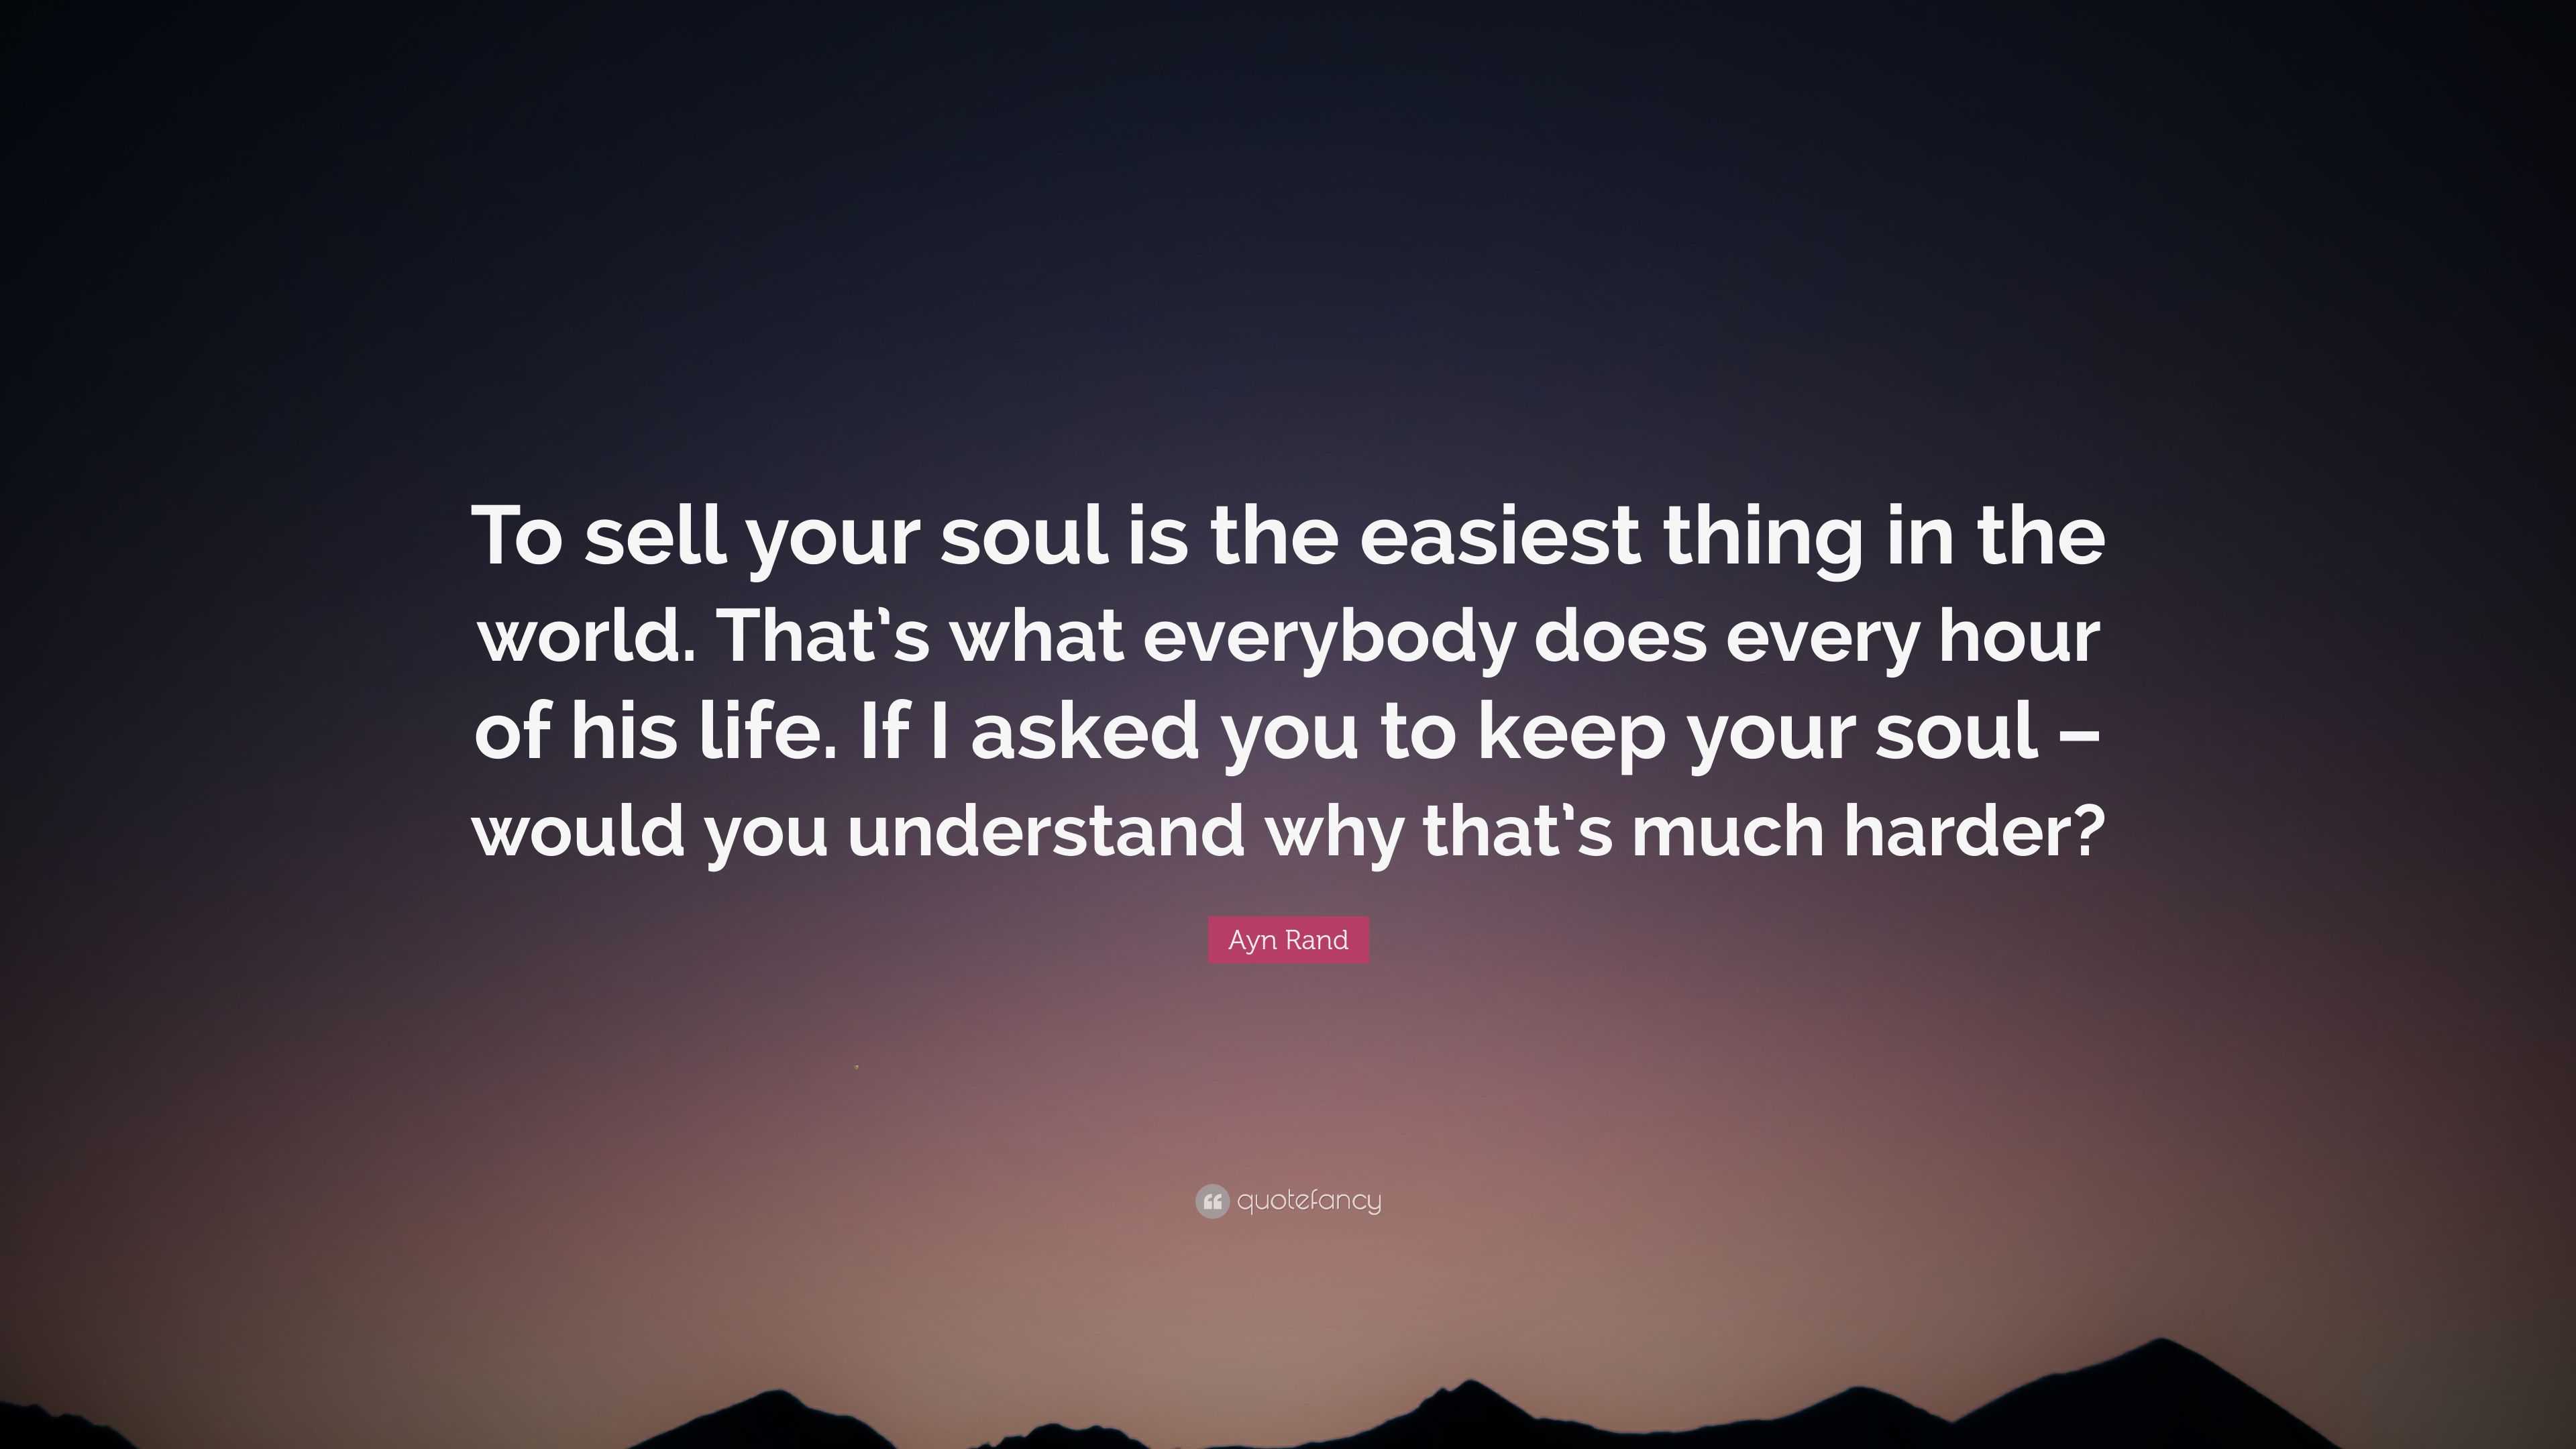 Ayn Rand Quote: “To sell your soul is the easiest thing in the world ...